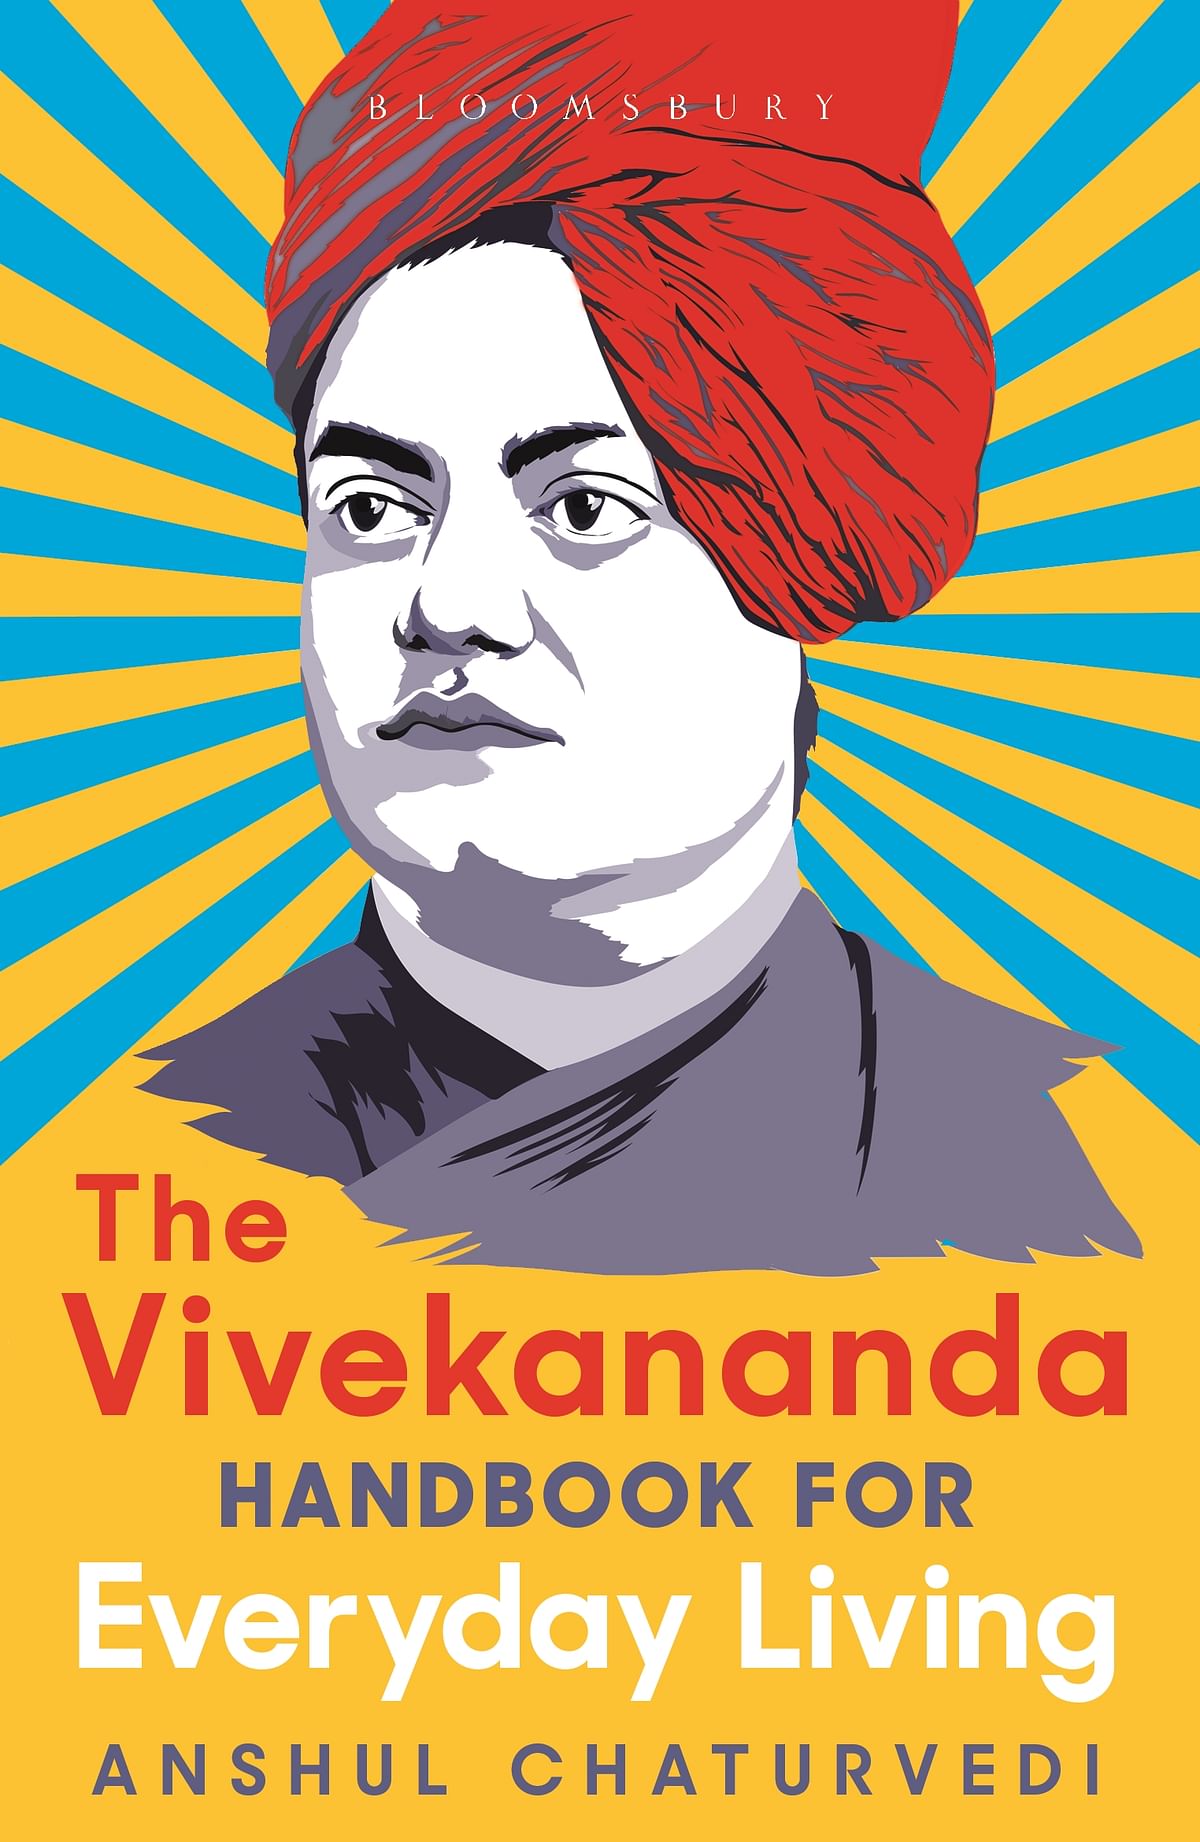 A book that reimagines Swami Vivekananda's teachings for today's times.